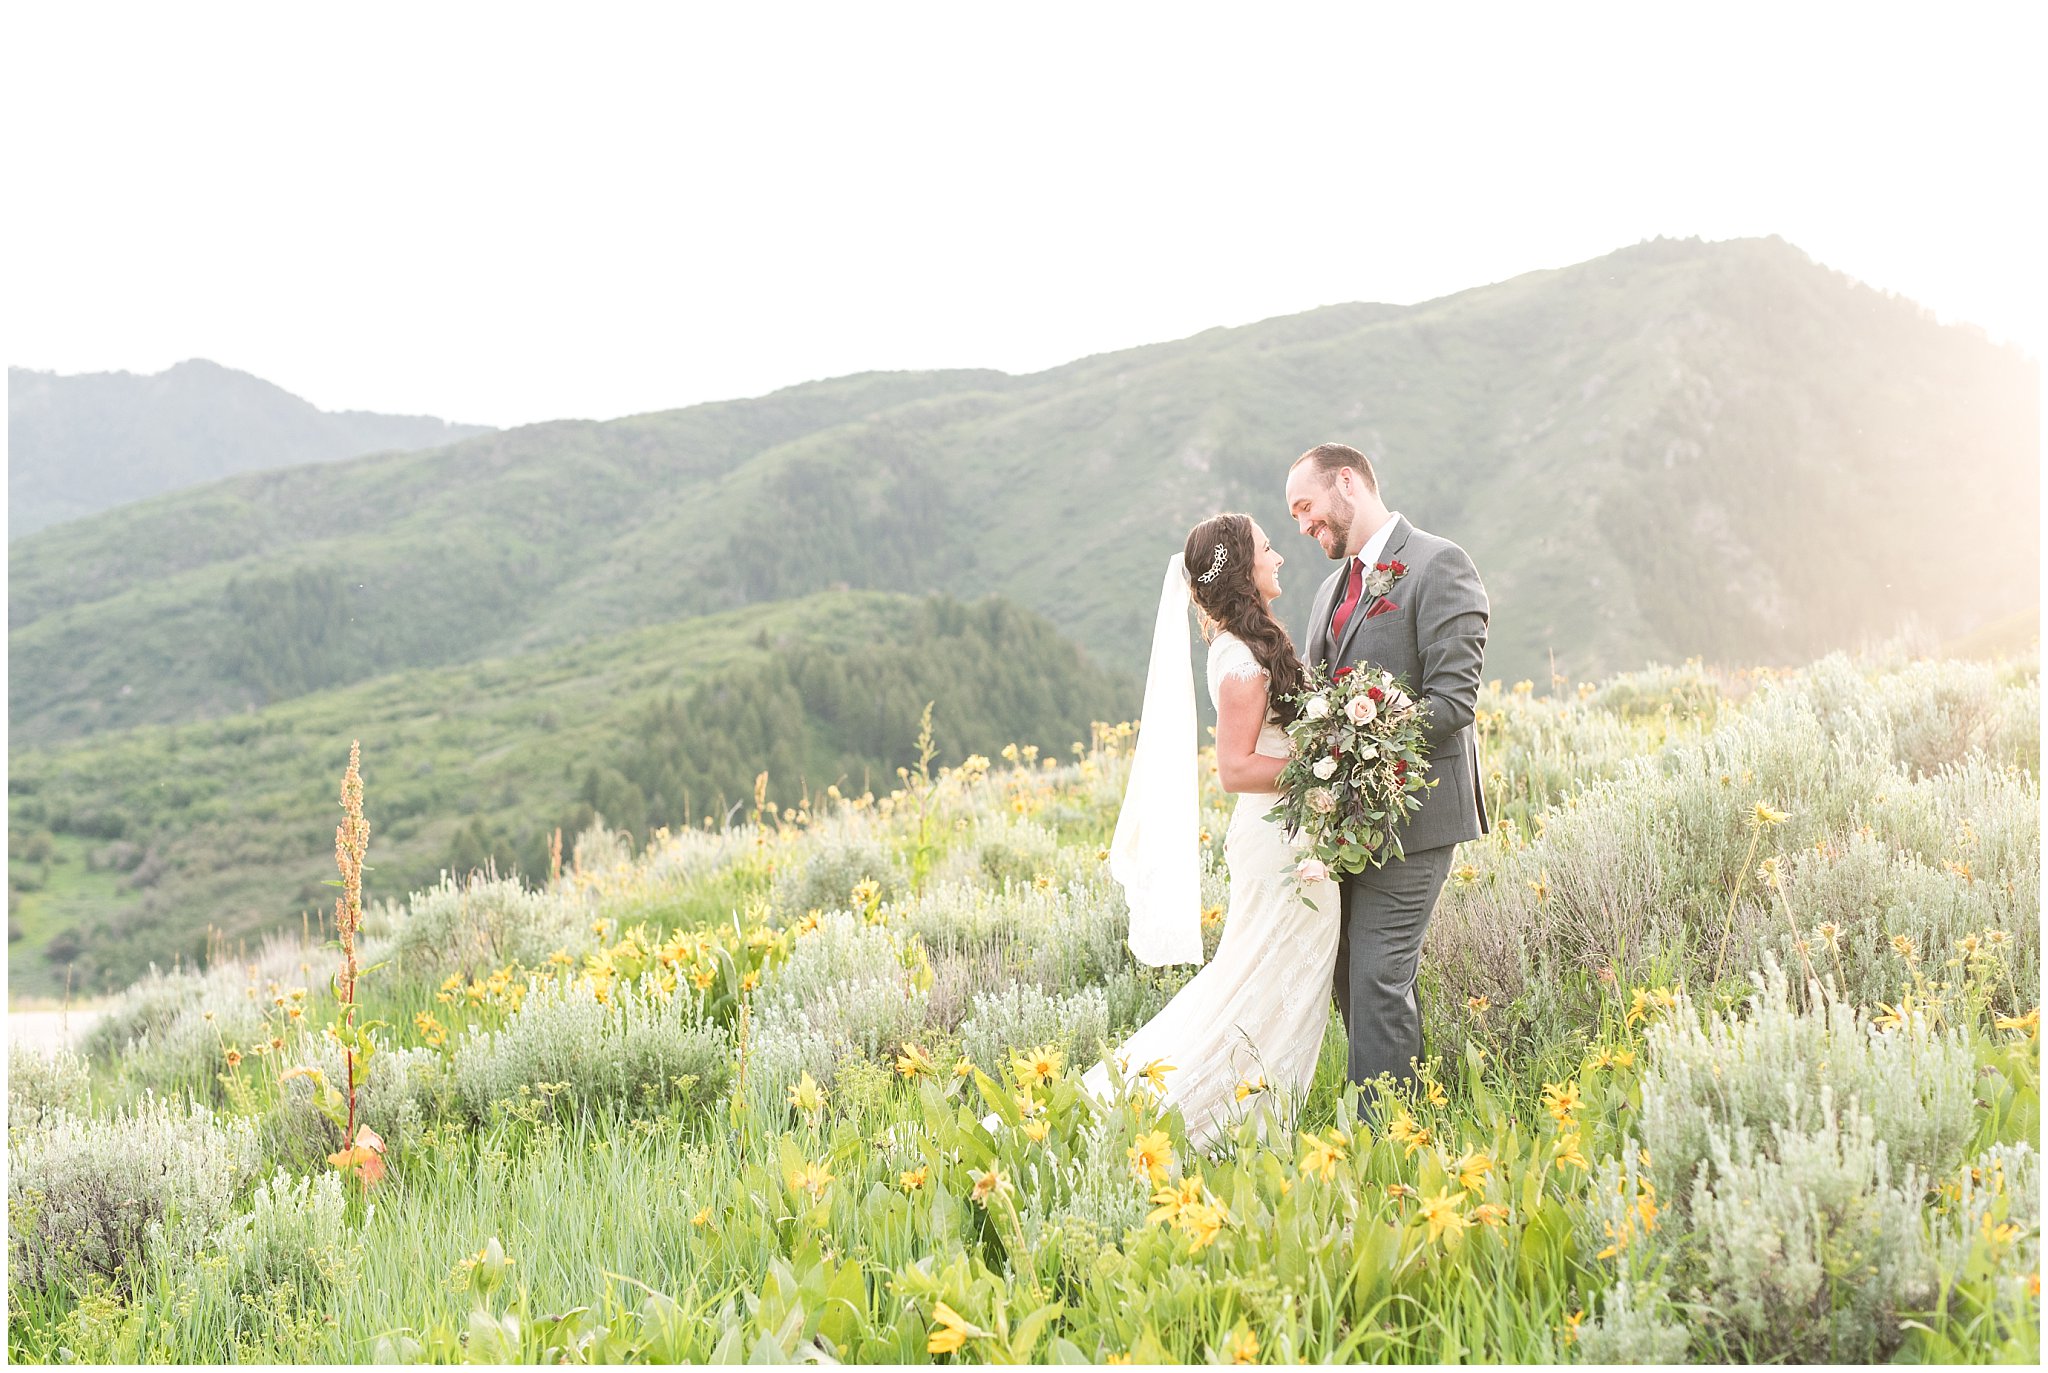 Bride and groom on top of Utah mountains in wildflowers | Top Utah Wedding and Couples Photos 2019 | Jessie and Dallin Photography